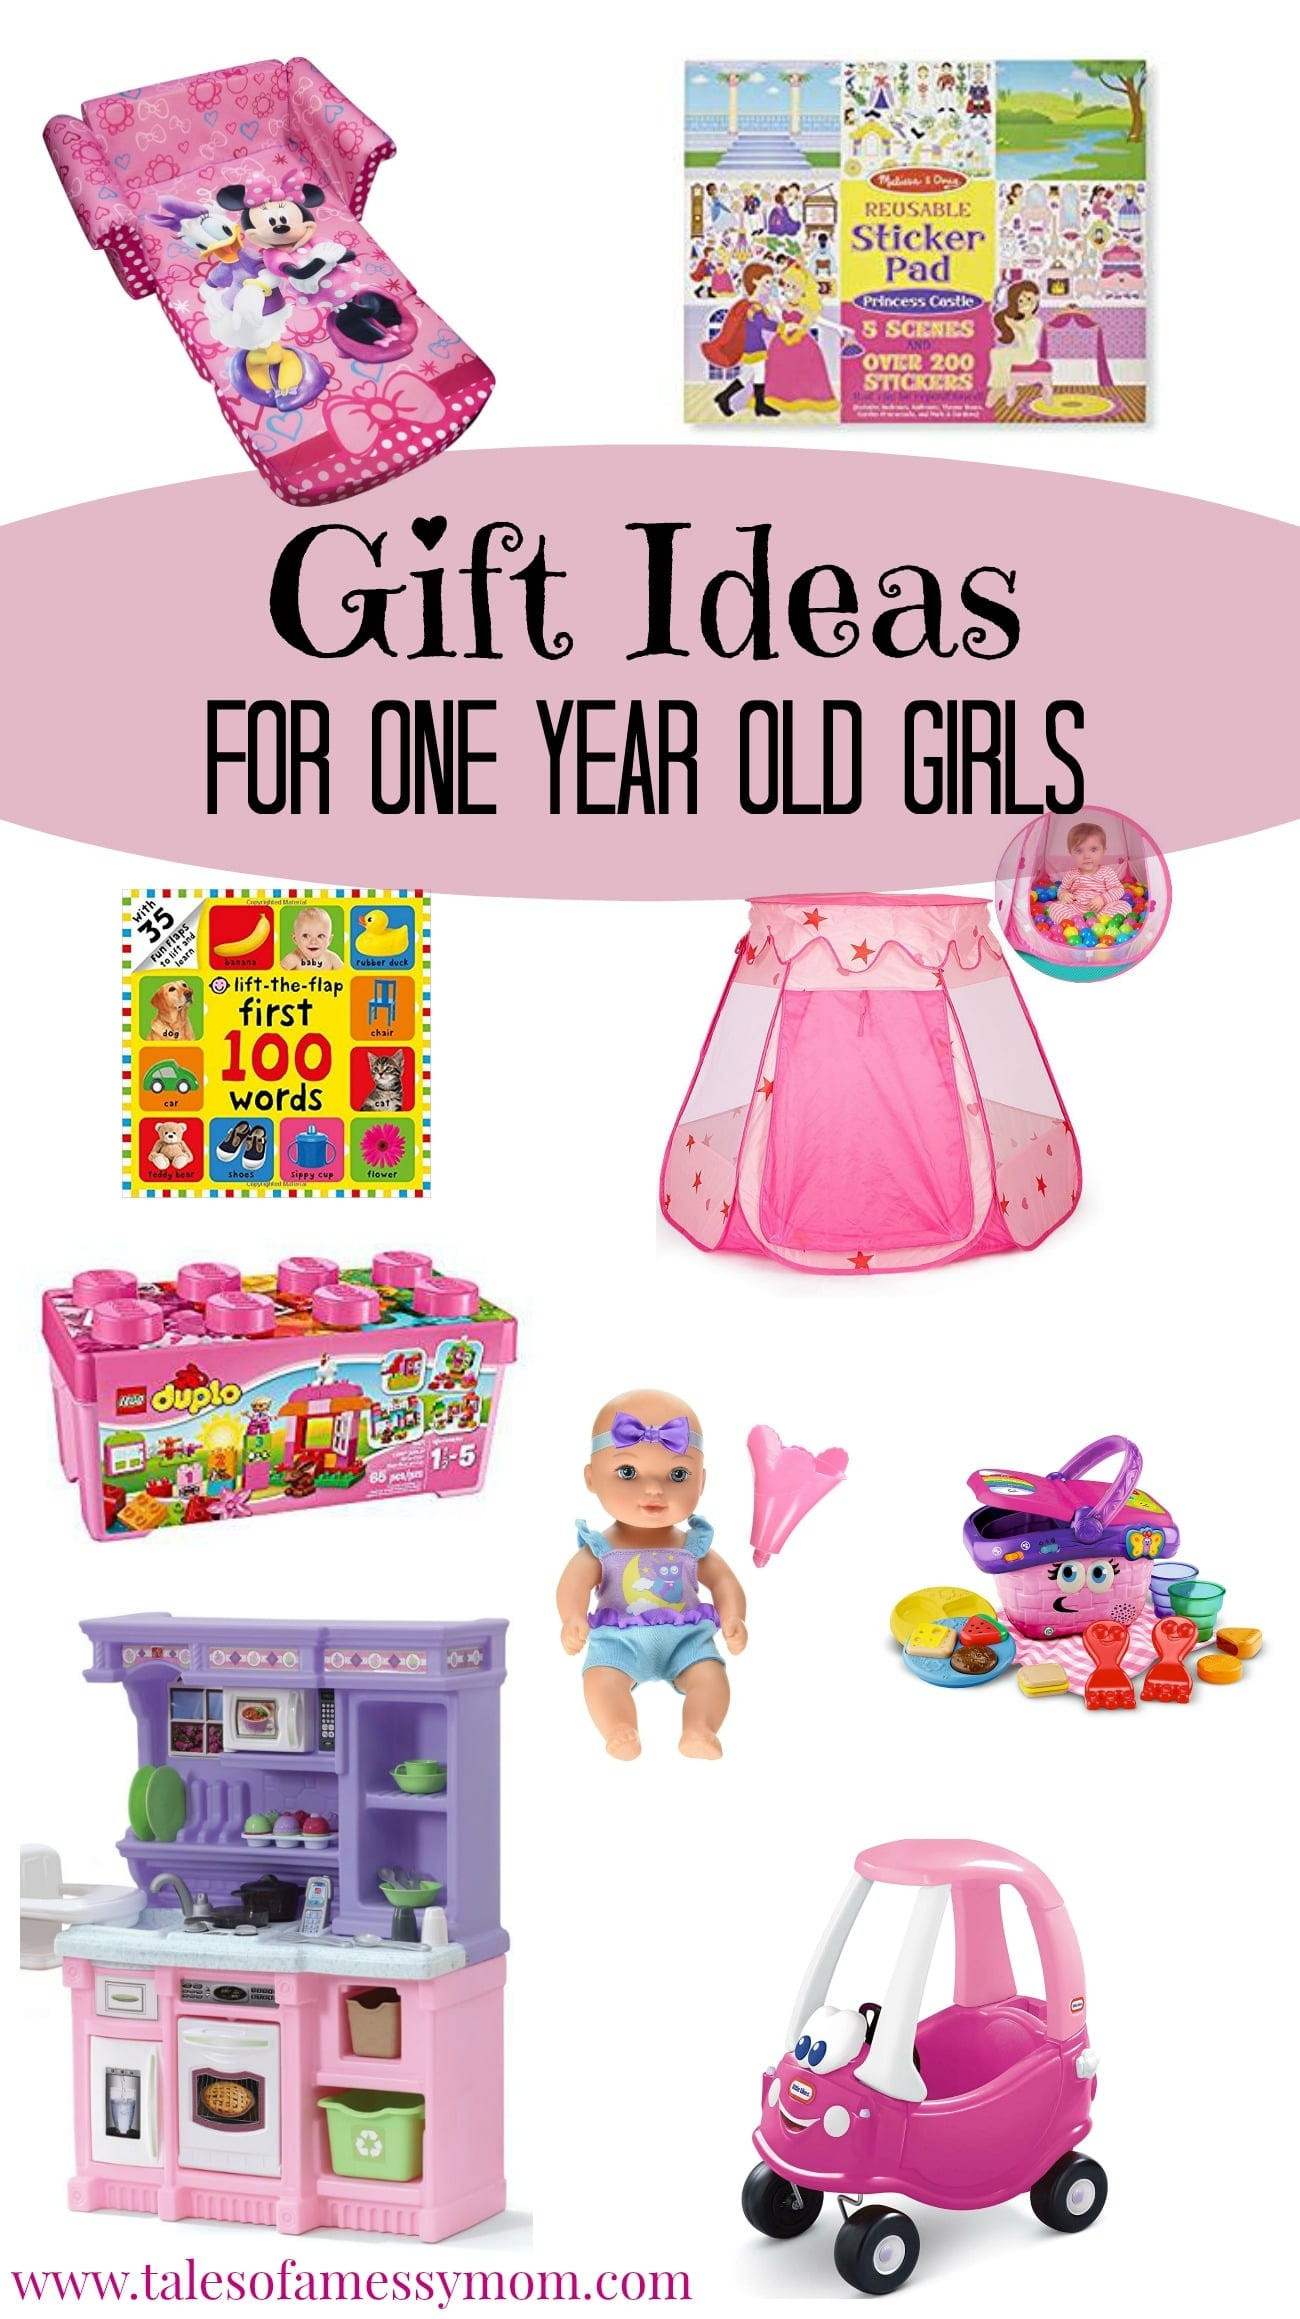 Gift Ideas For 1 Year Old Girls
 Gift Ideas for e Year Old Girls Tales of a Messy Mom